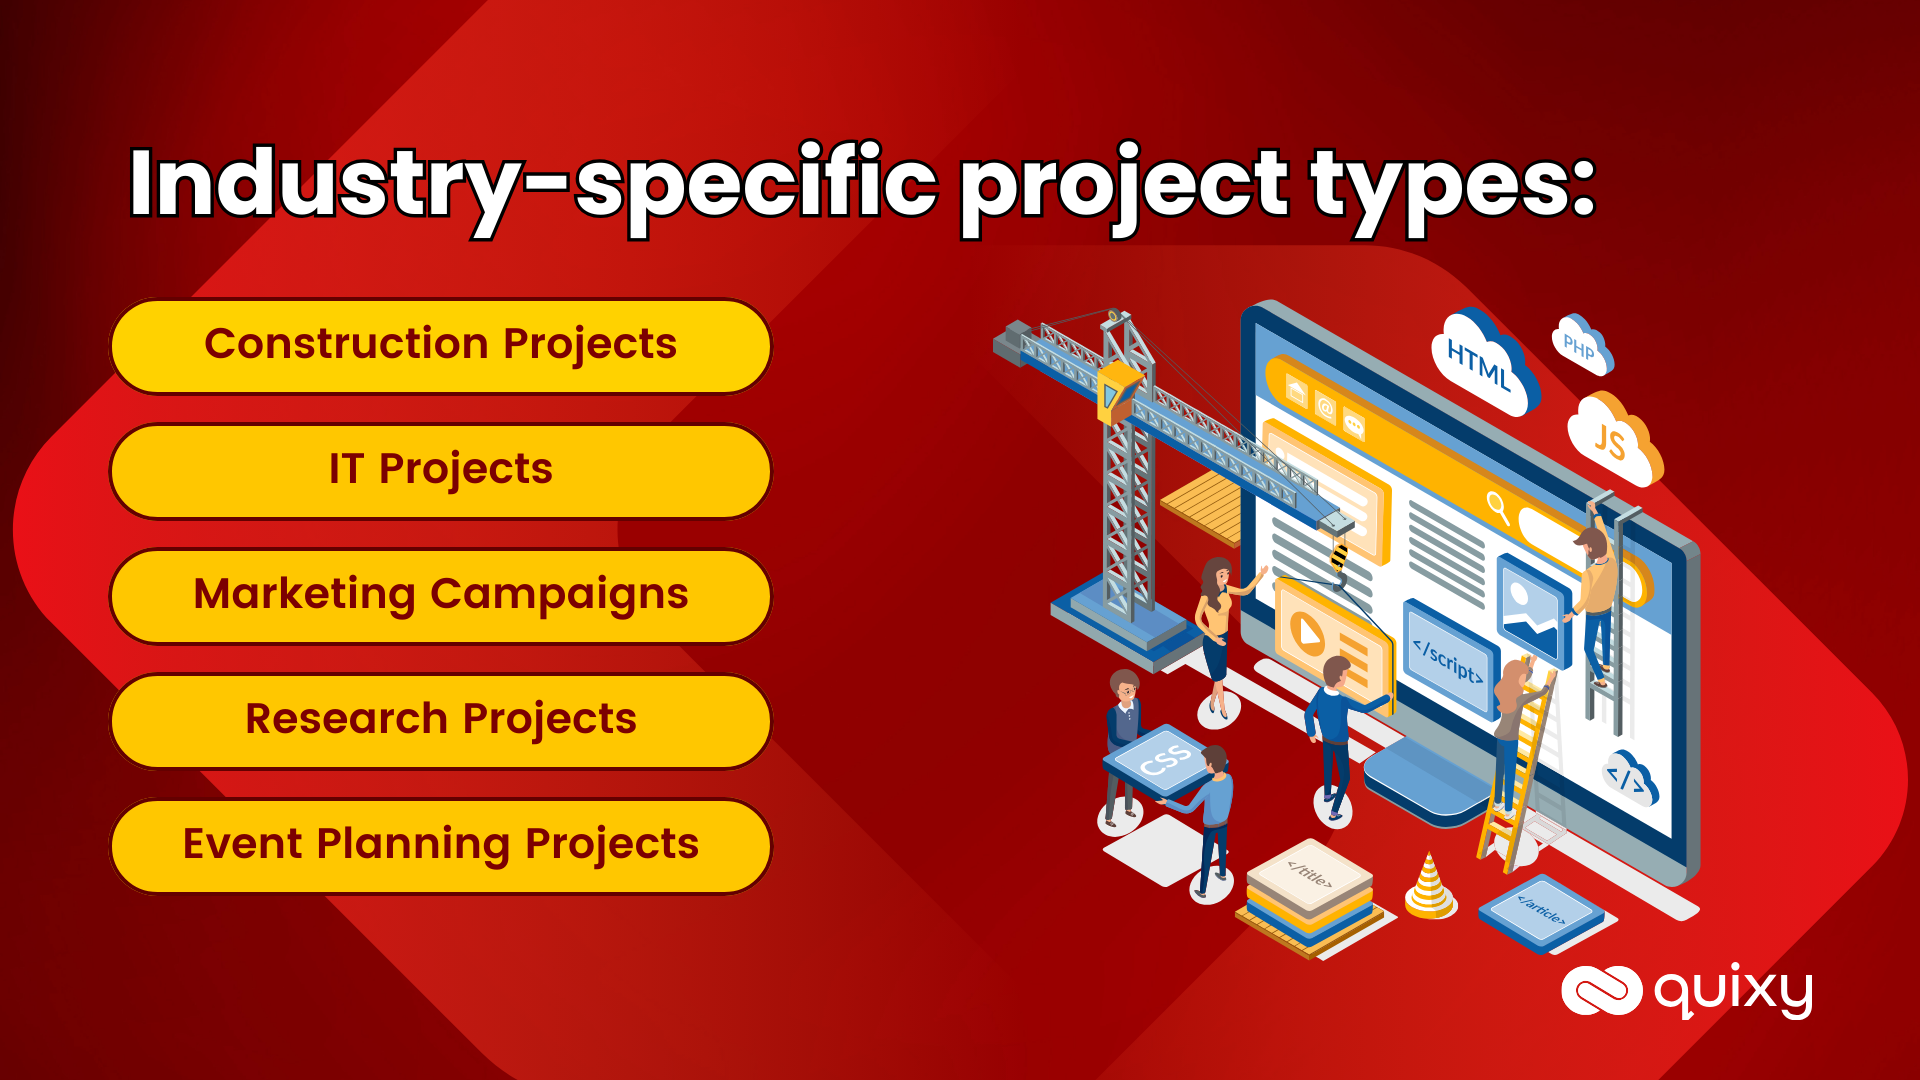 Industry-specific project types